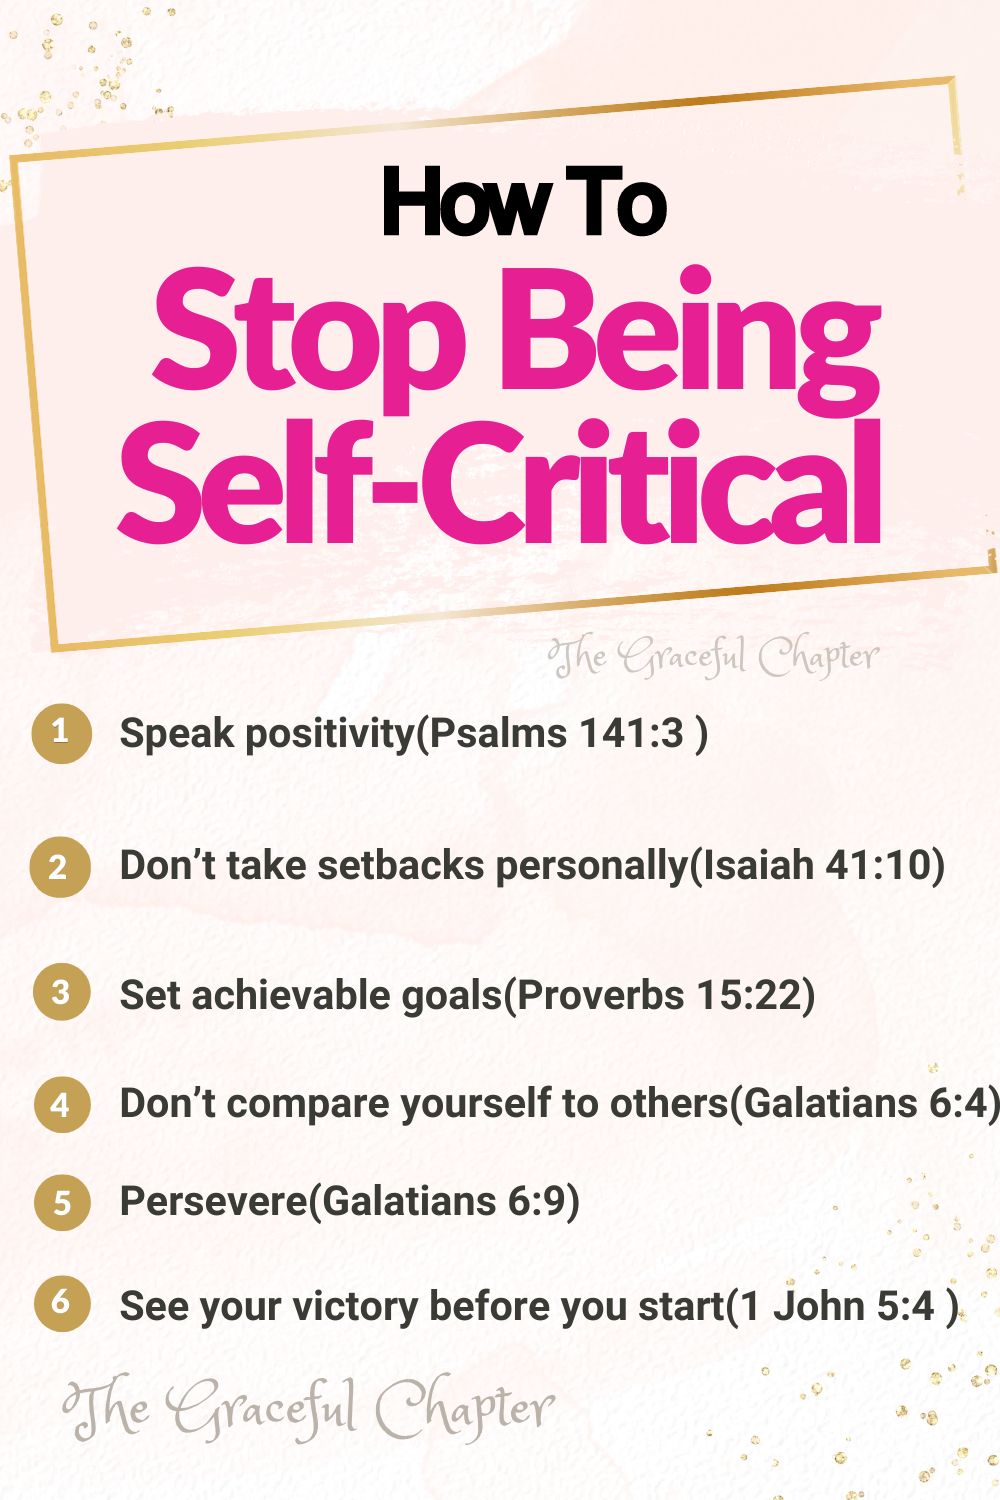 How To Stop Being Self-Critical